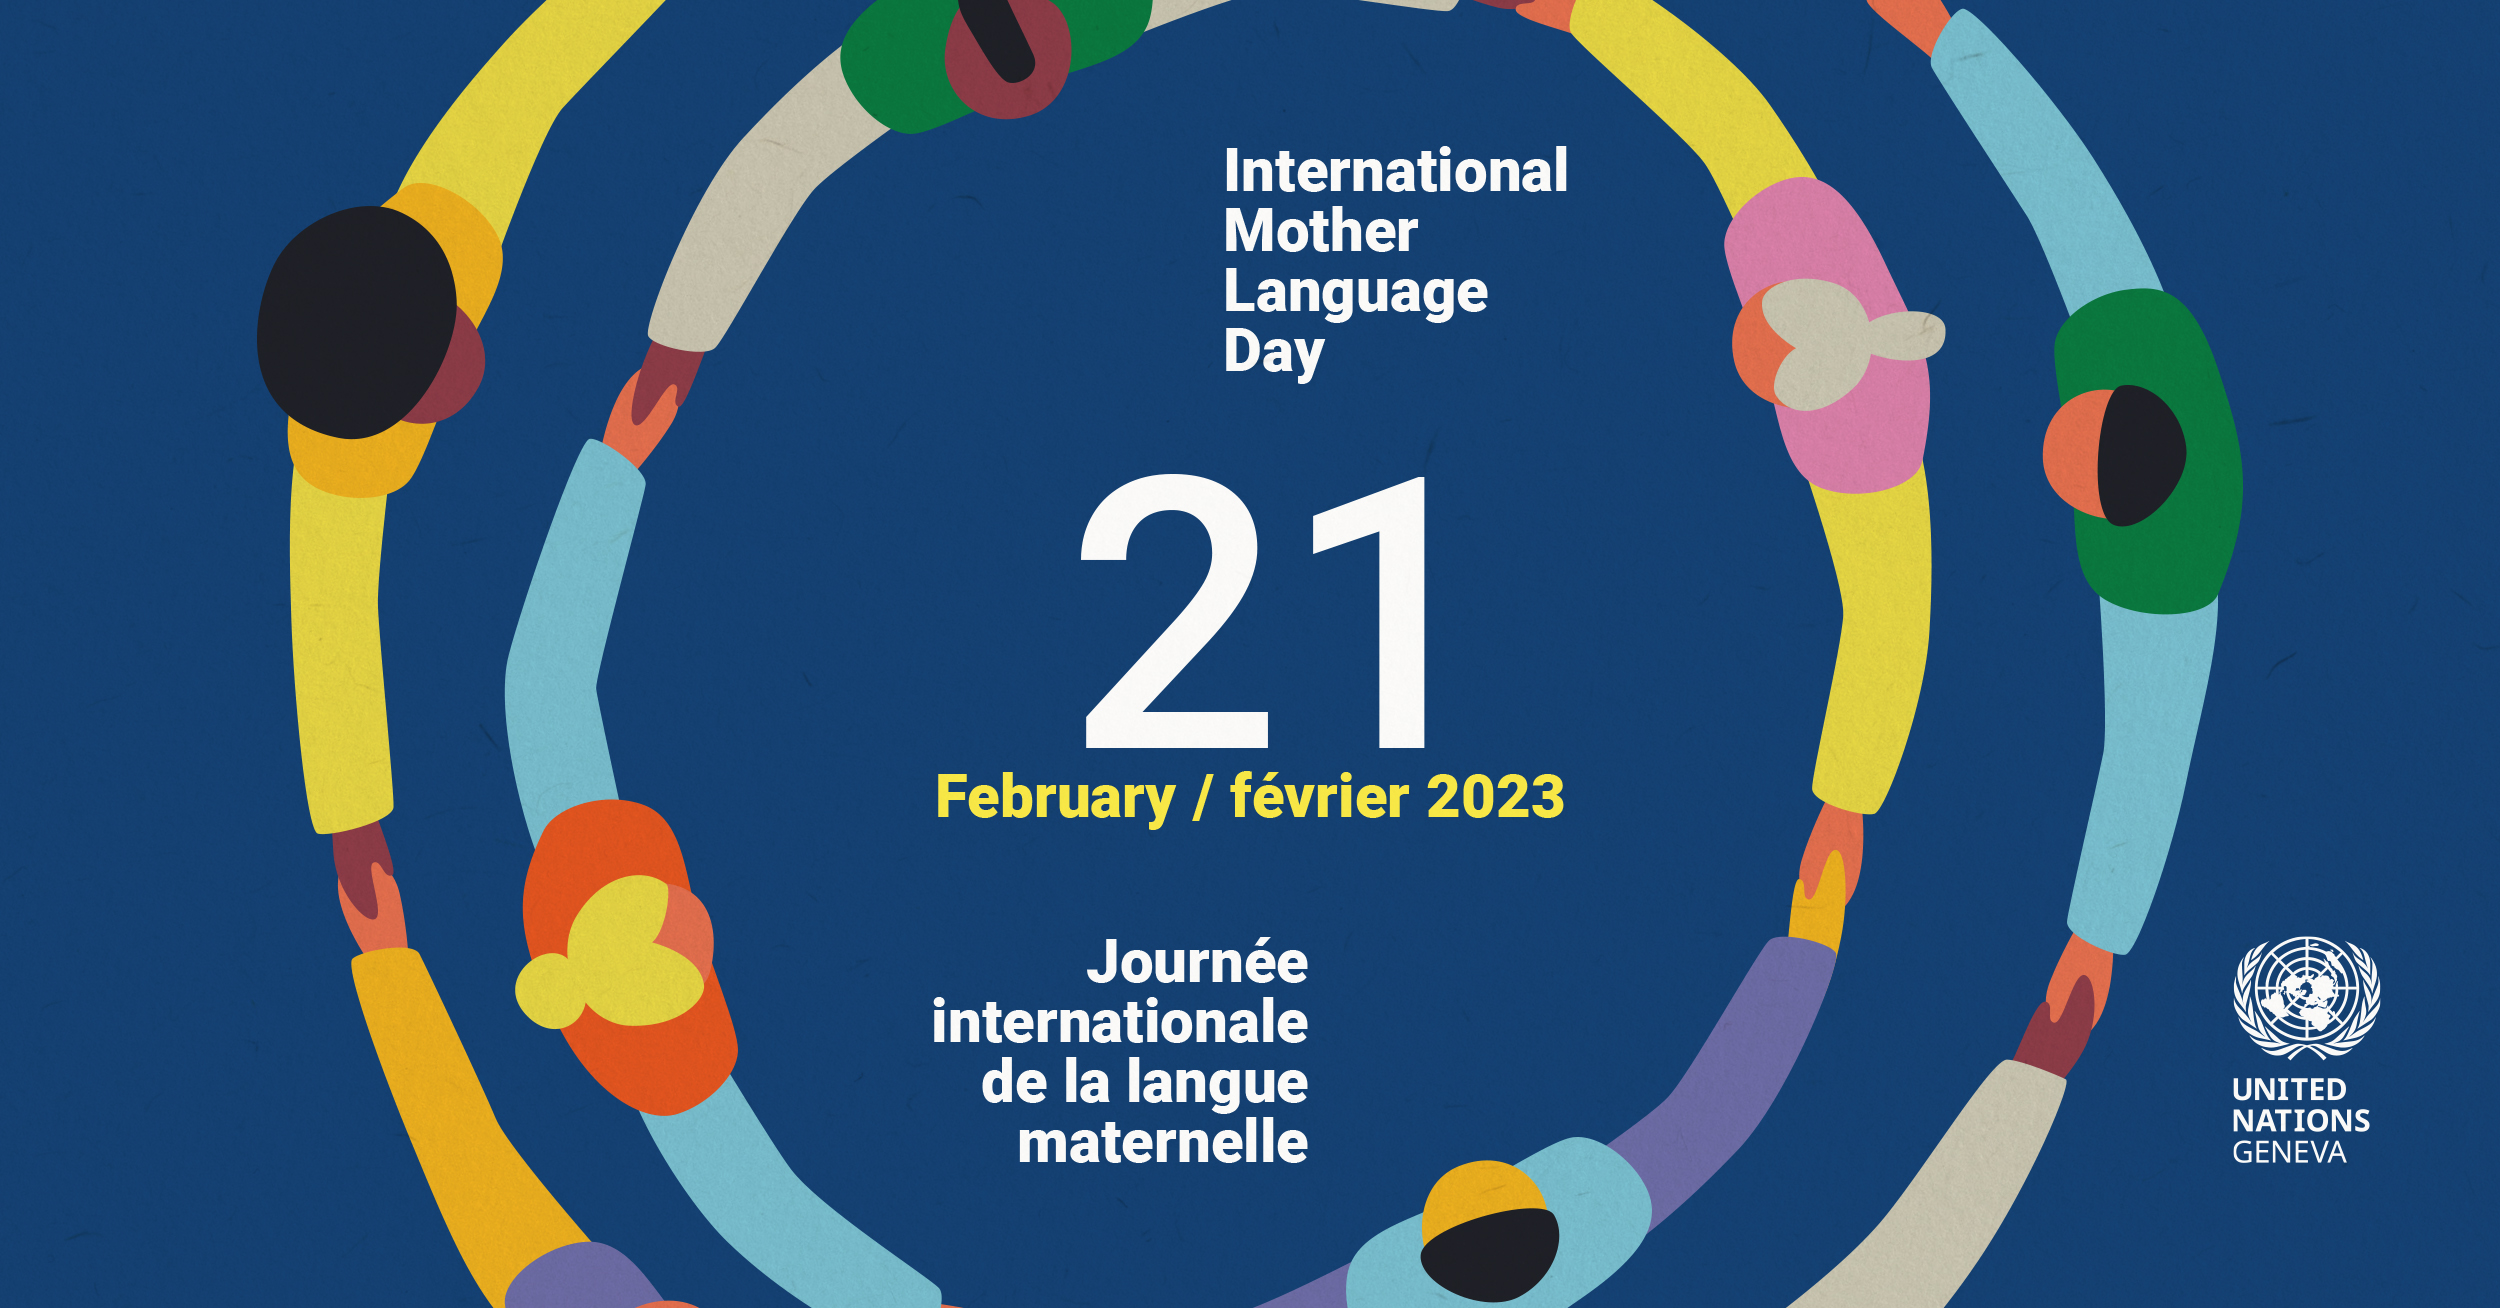 An illustration with people holding hands, and in the middle "International Mother Language Day / Journée internationale de la langue maternelle, 21 February / 21 février"